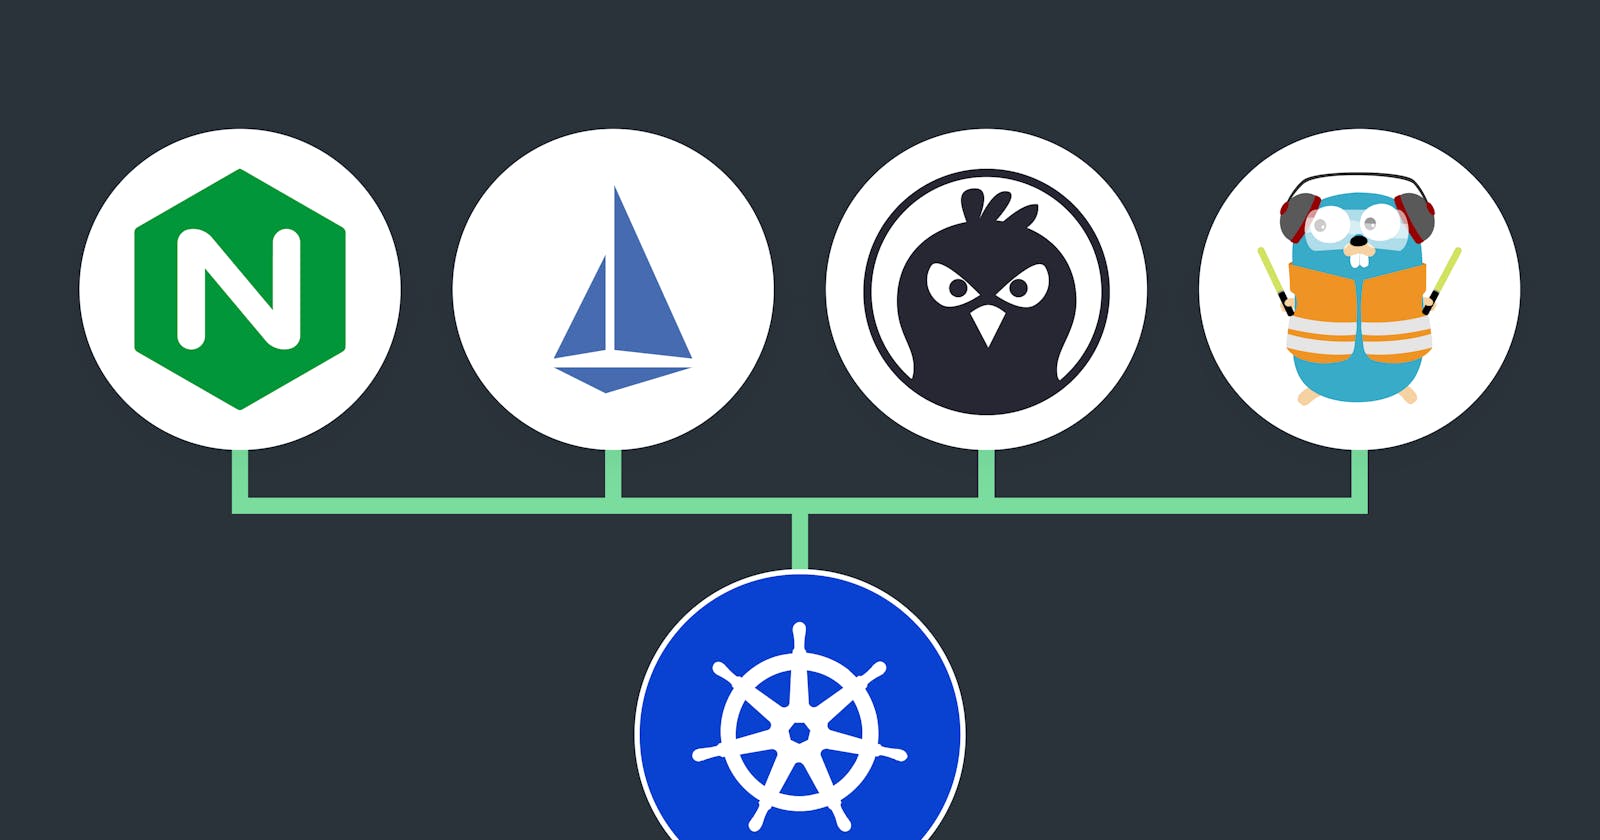 When We Have Services in Kubernetes, Why Do We Use Ingress?